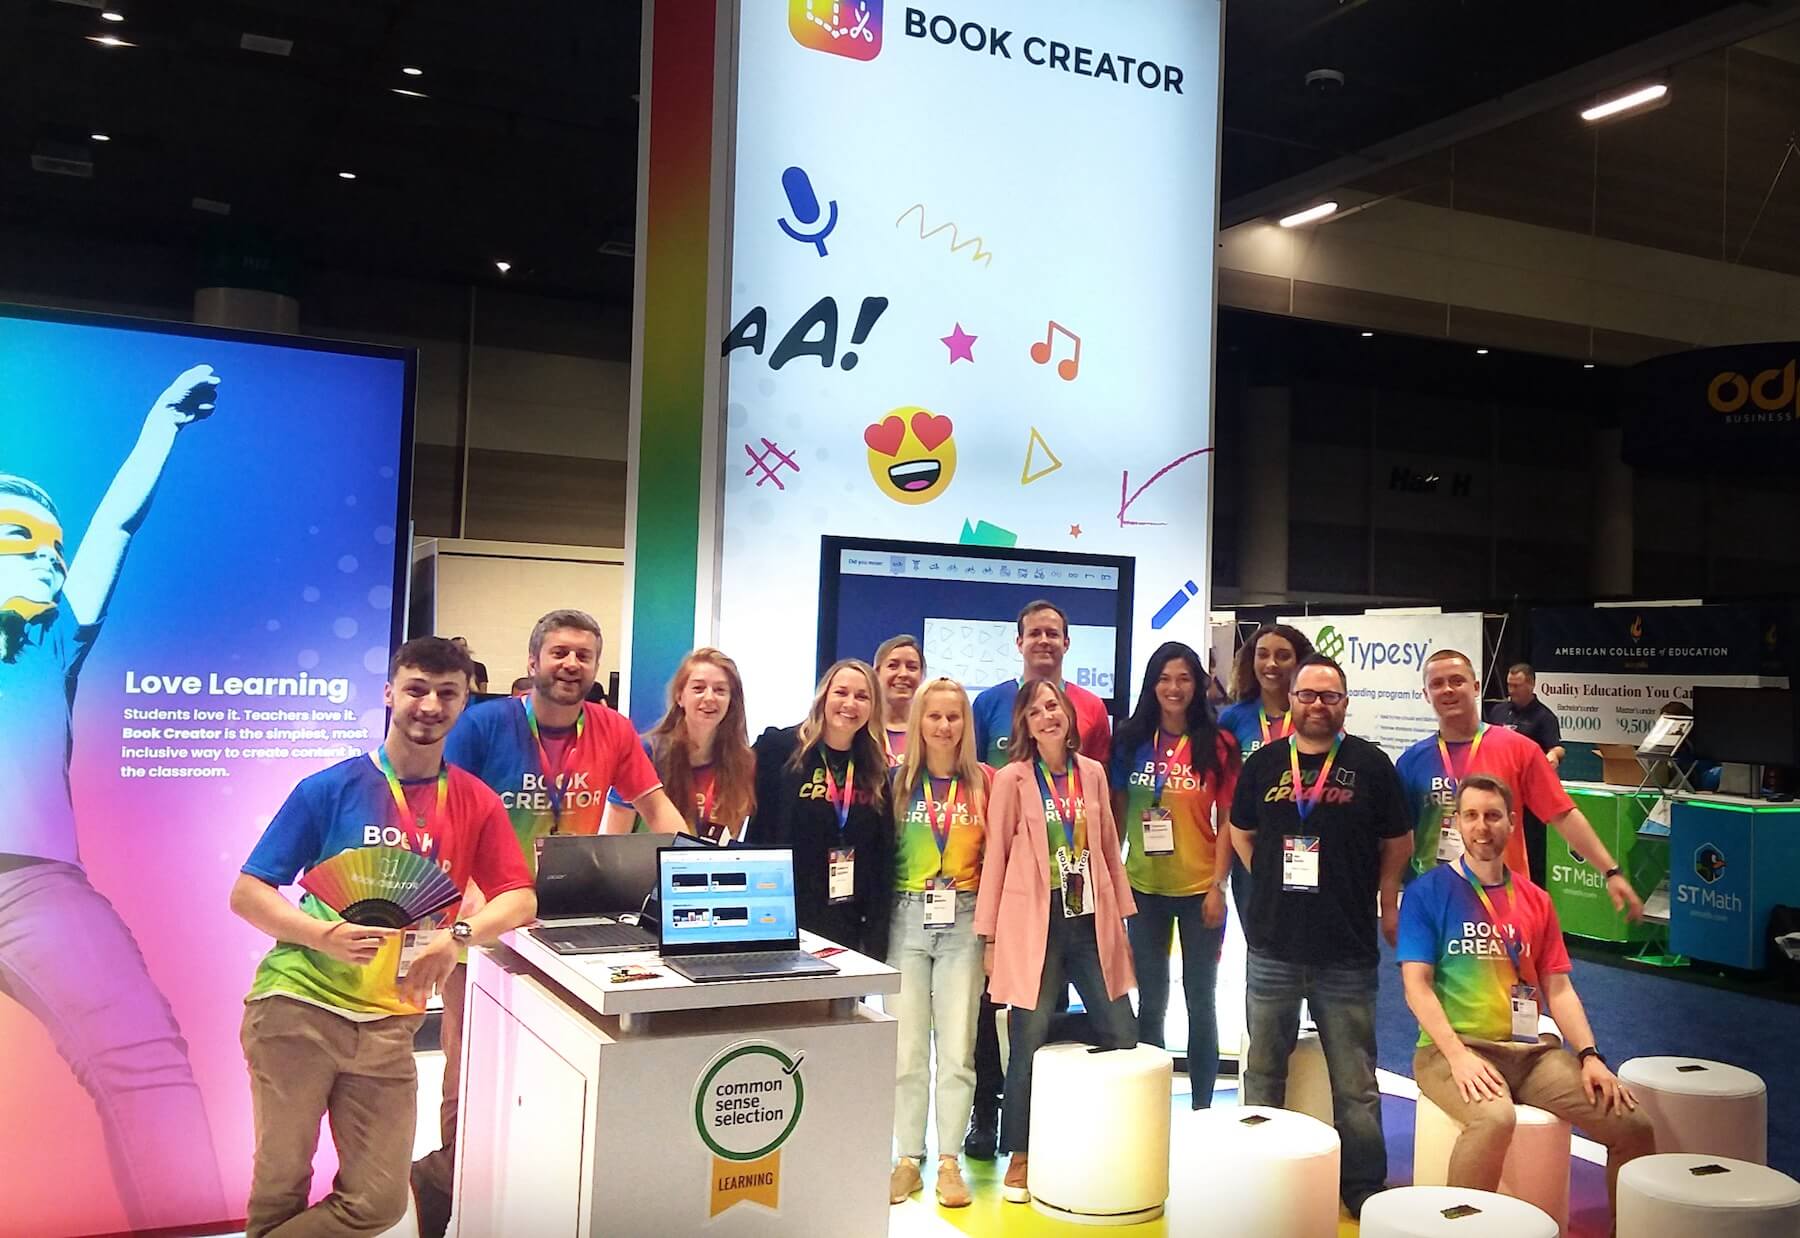 Some of the Book Creator team at ISTE 2022